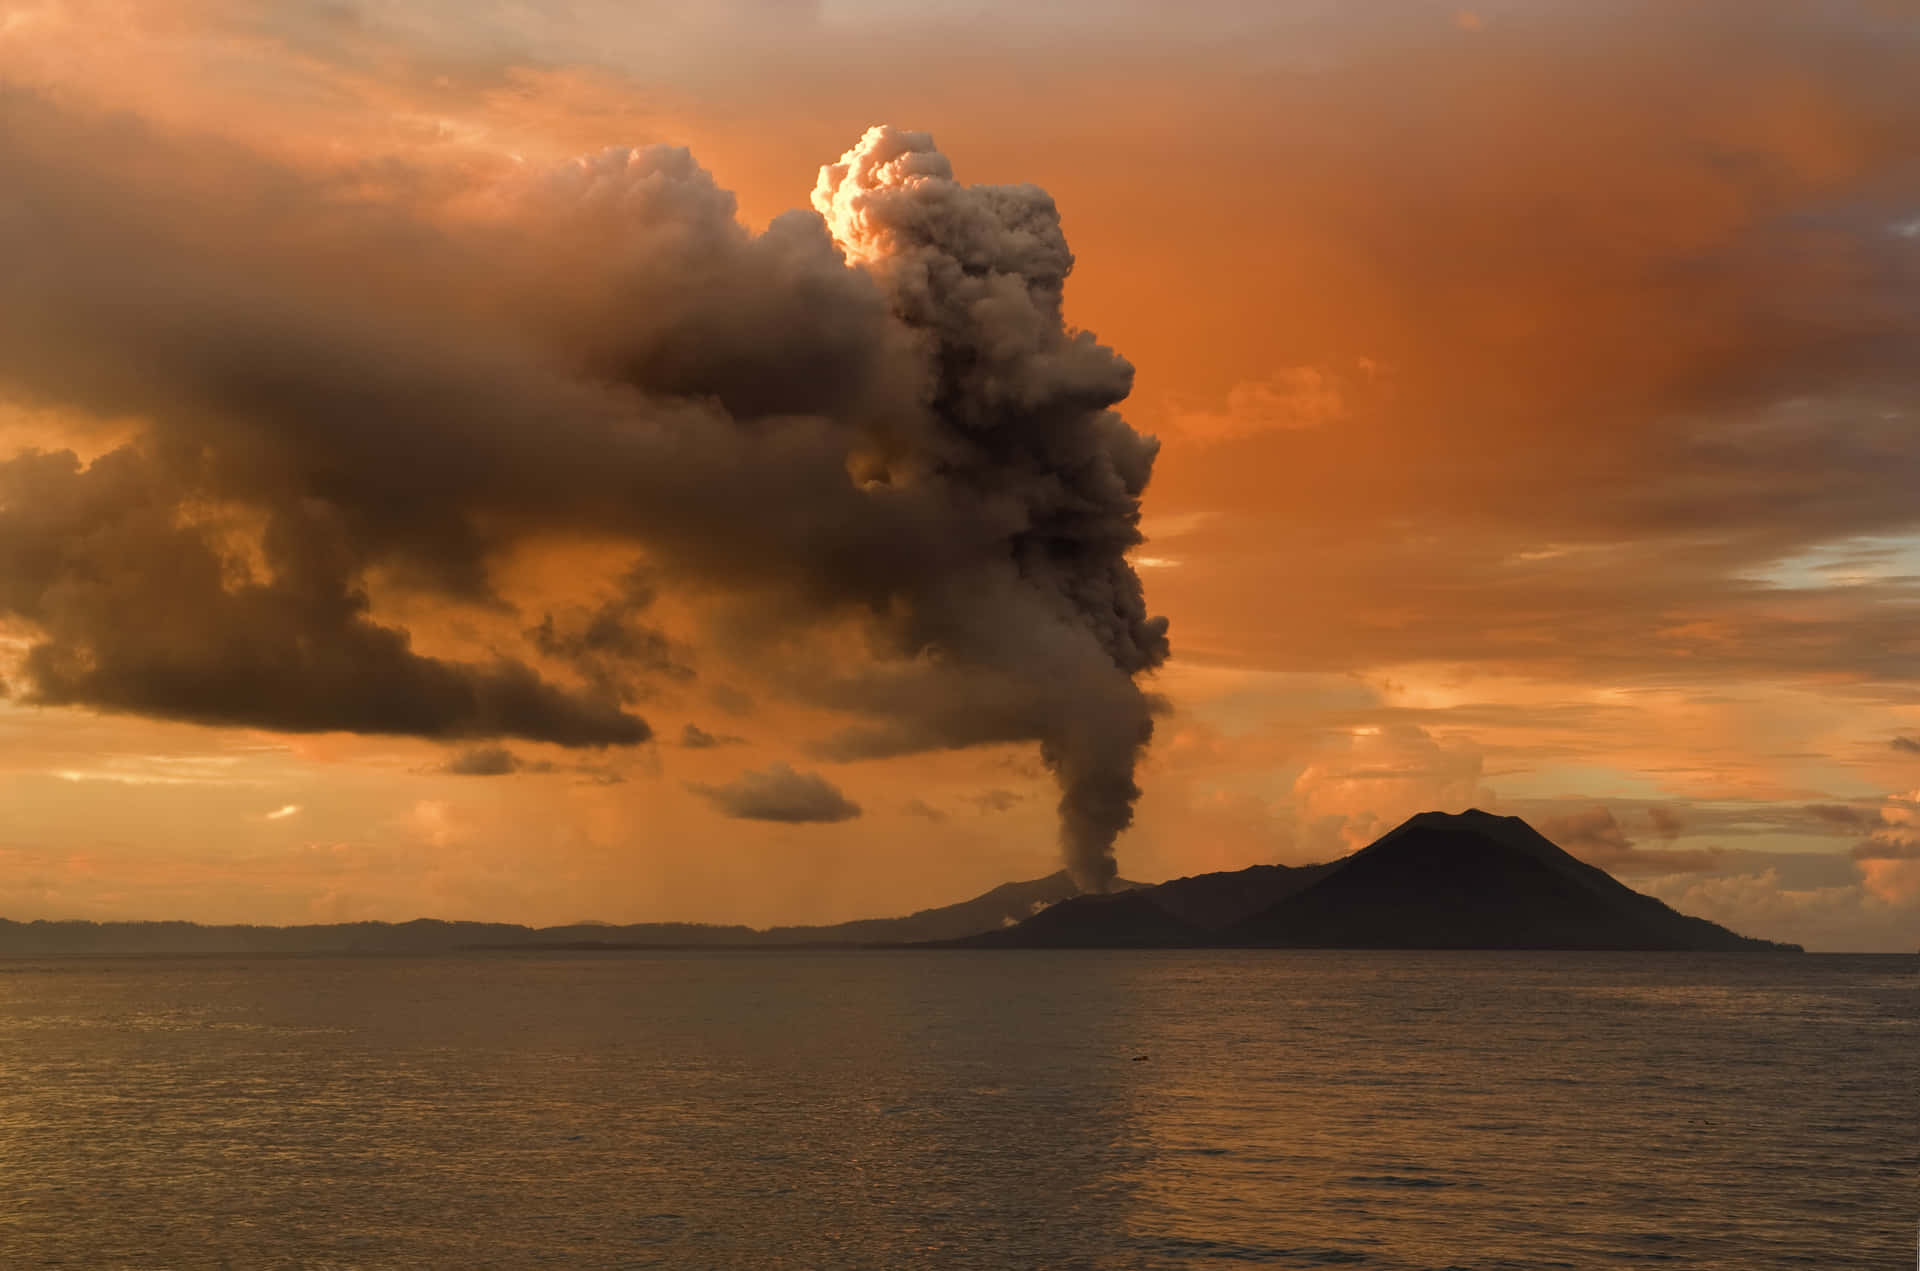 A Volcano Is Seen Rising From The Ocean